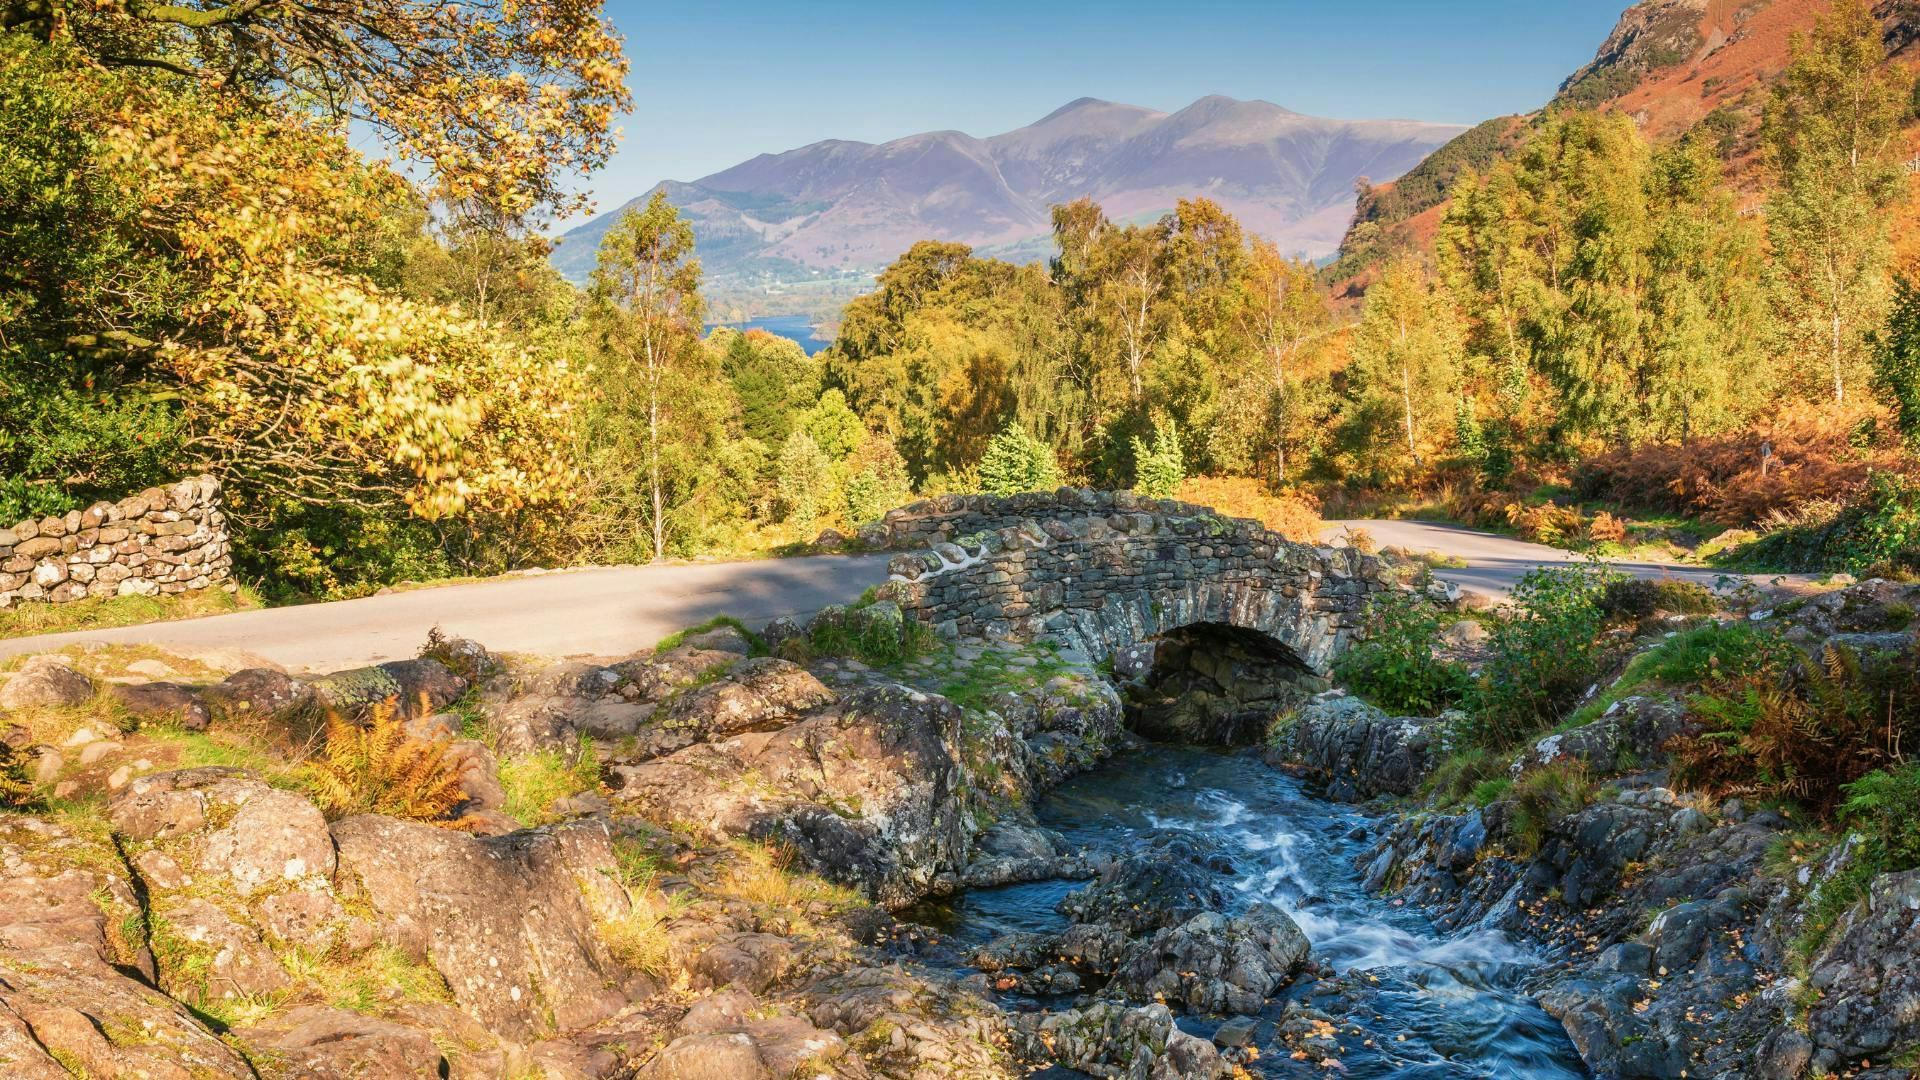 a old bridge with a small river flowing underneath with the peaks of mountains in the background